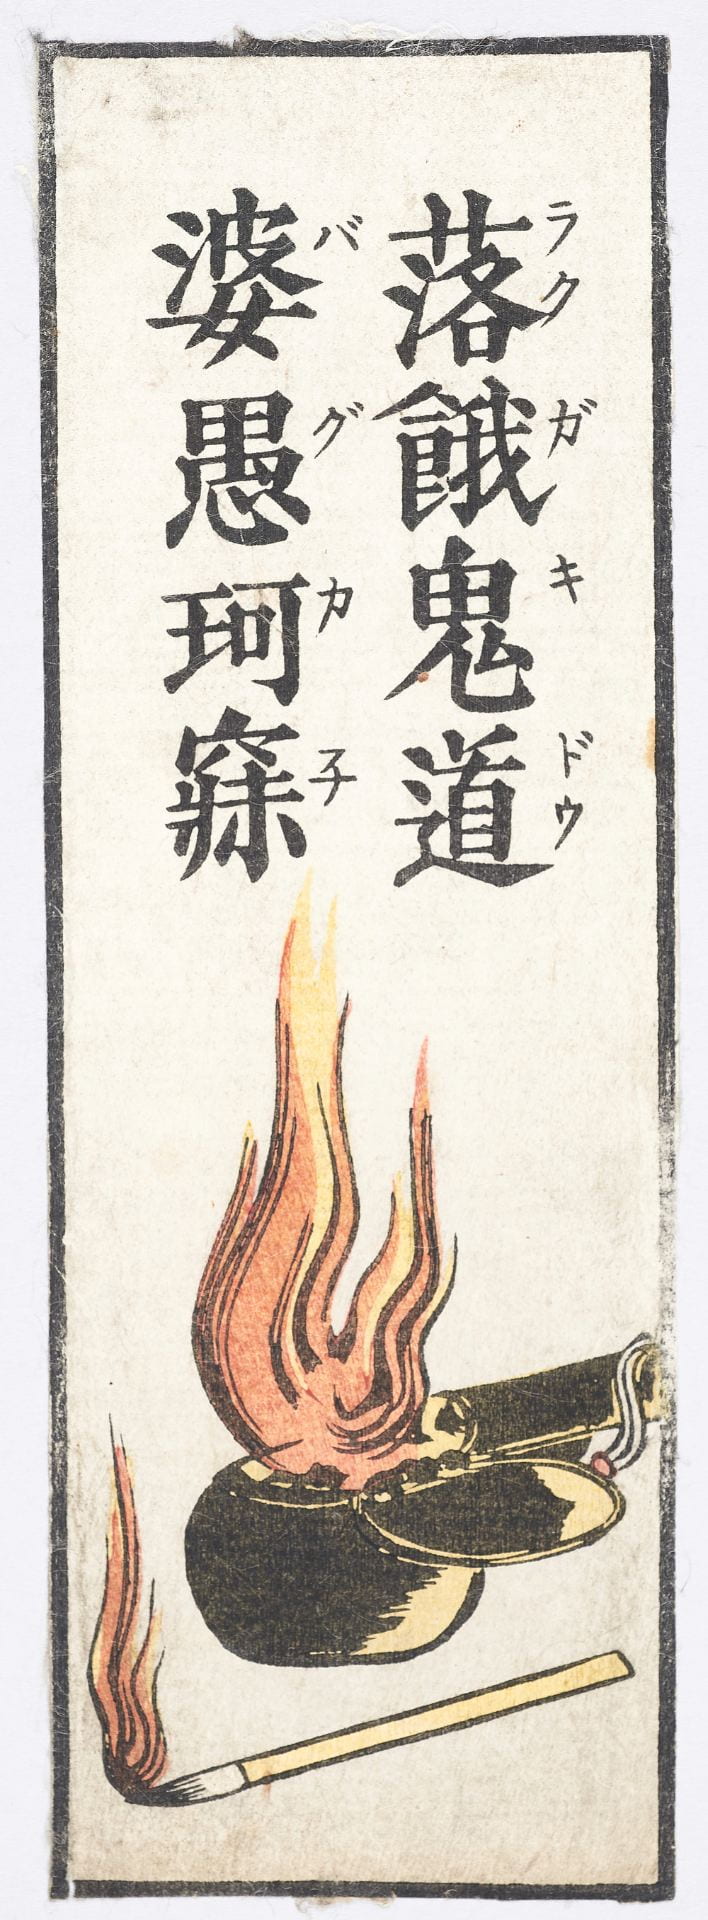 votive slip with text in upper half, image of ink brush and pot on fire below